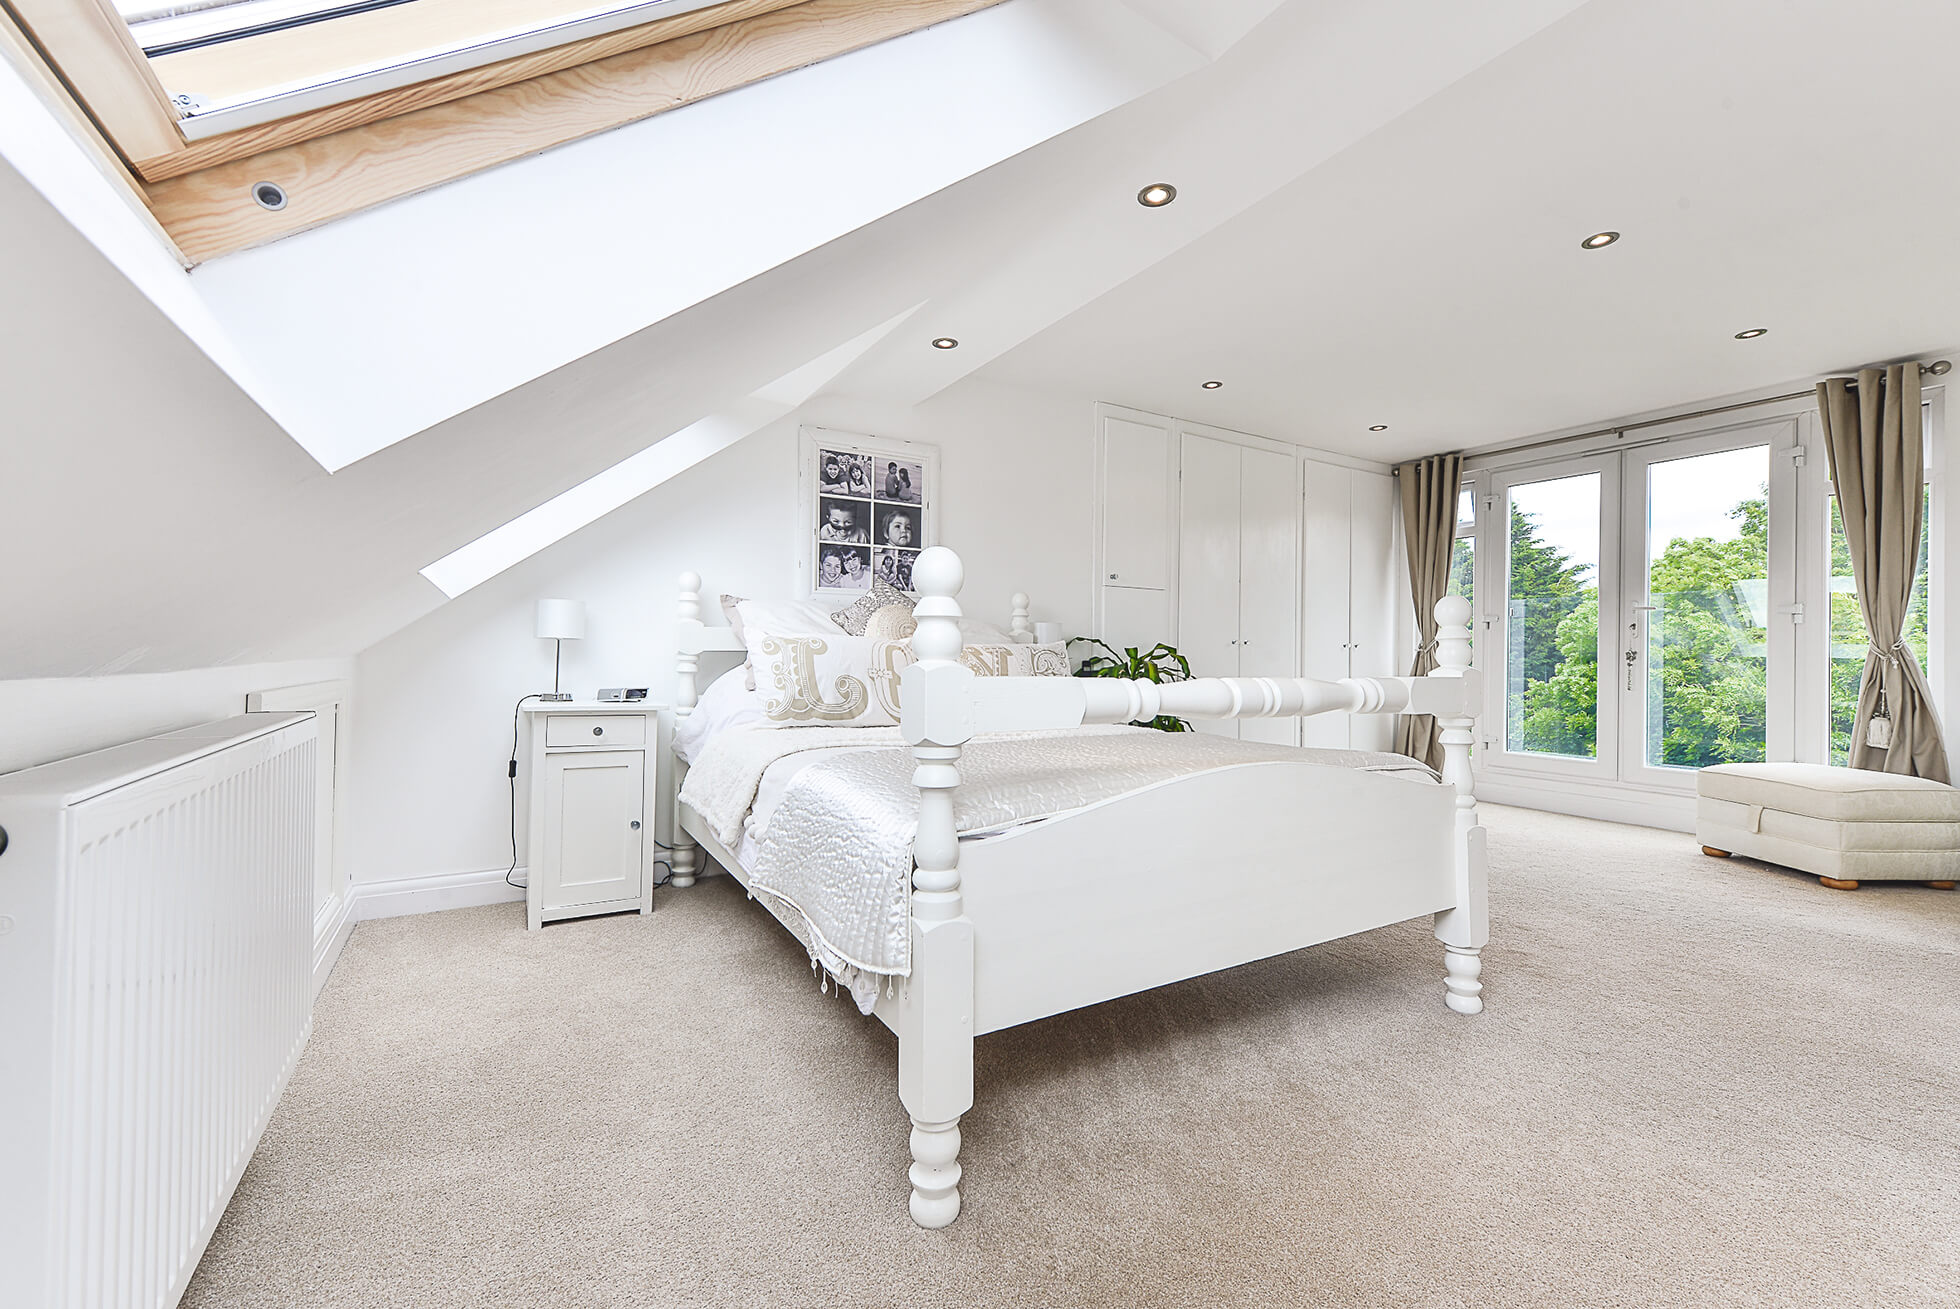 Do you have a question about converting your Loft in Hunsdon? Here are the most popular questions asked by our clients.